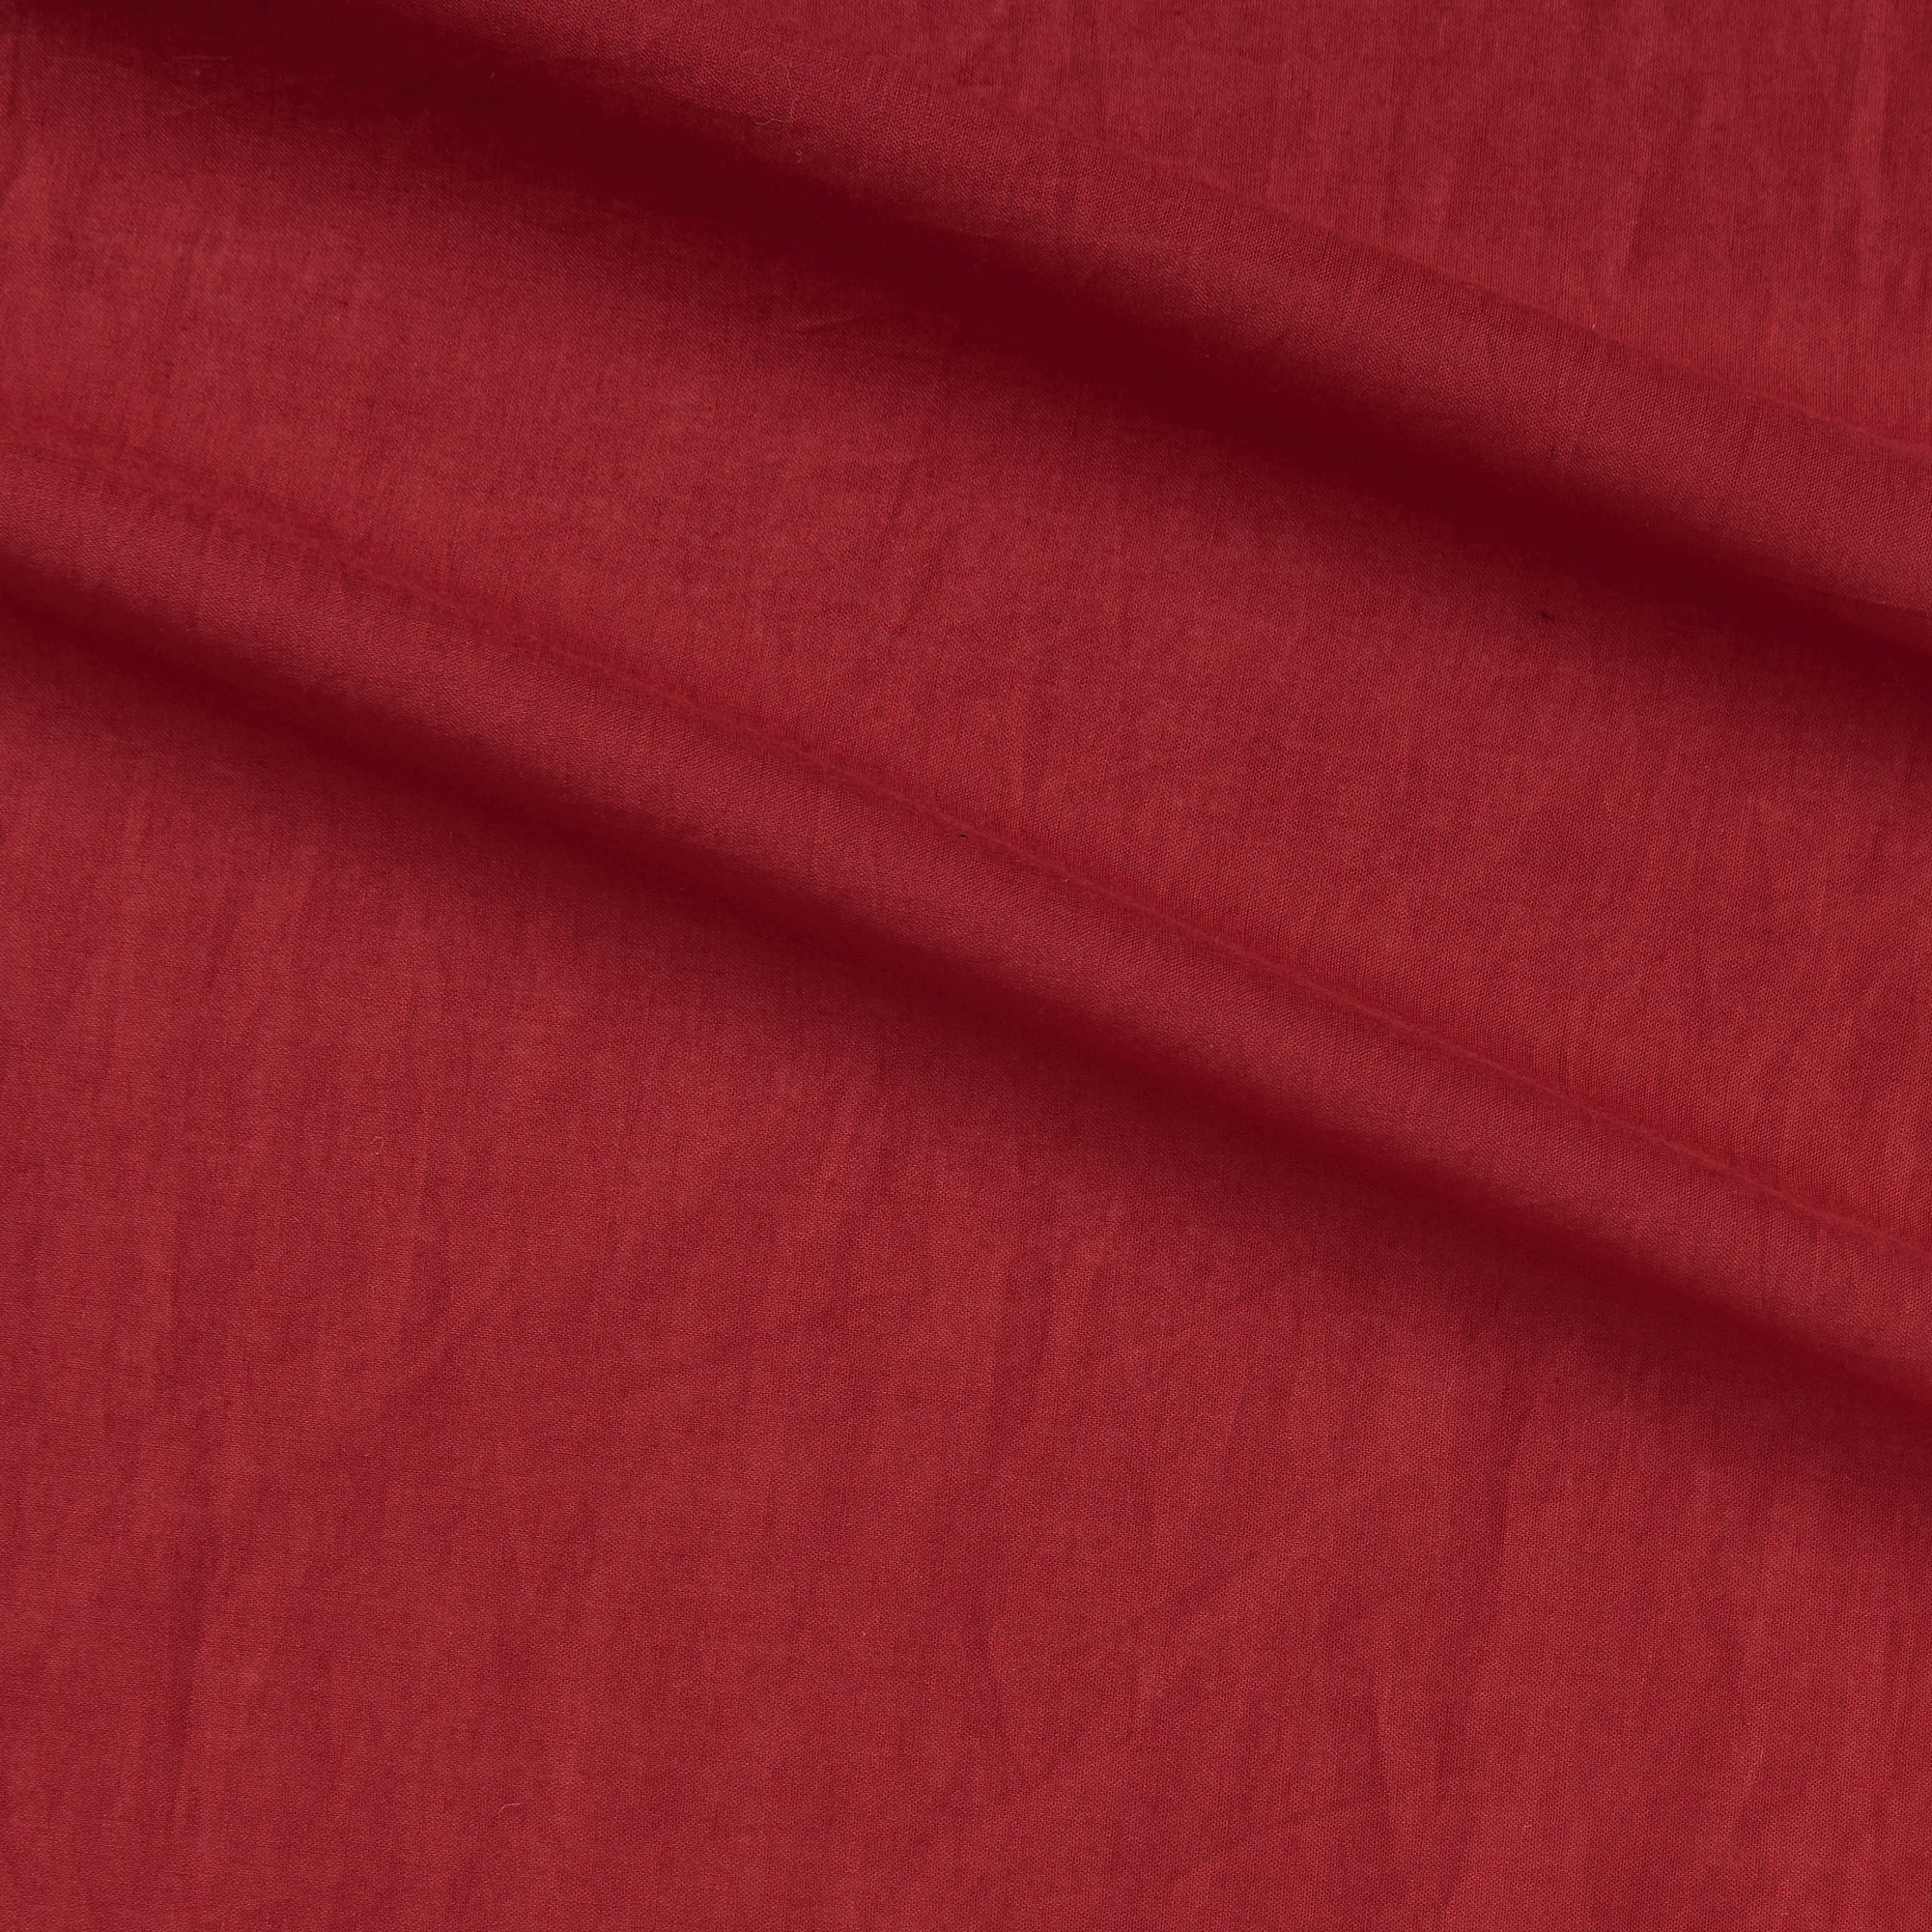 Haitana presenting the Red color version of a Fine light weight breathable soft smooth pure cotton voile